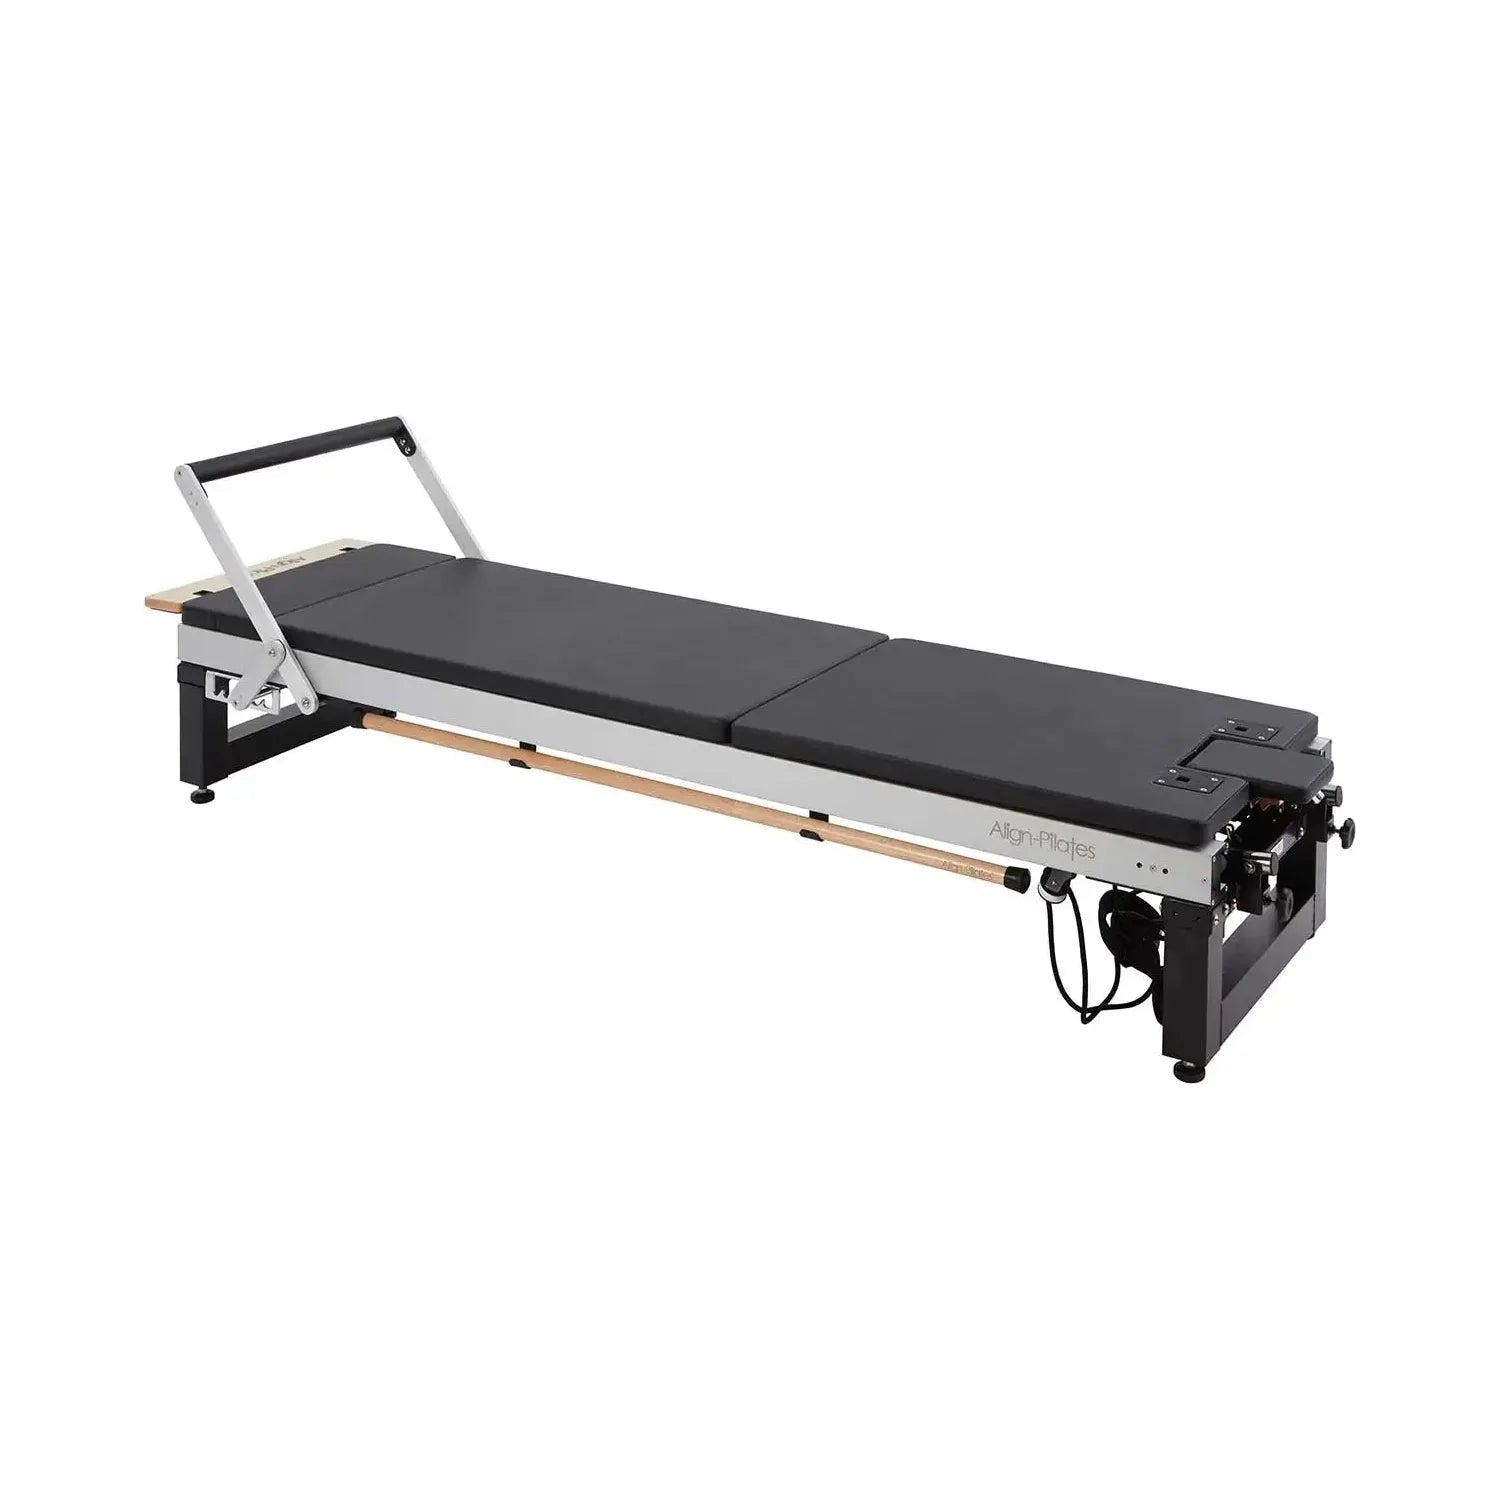 Side view of the Align A8 Reformer, focusing on its sturdy frame and high-quality construction